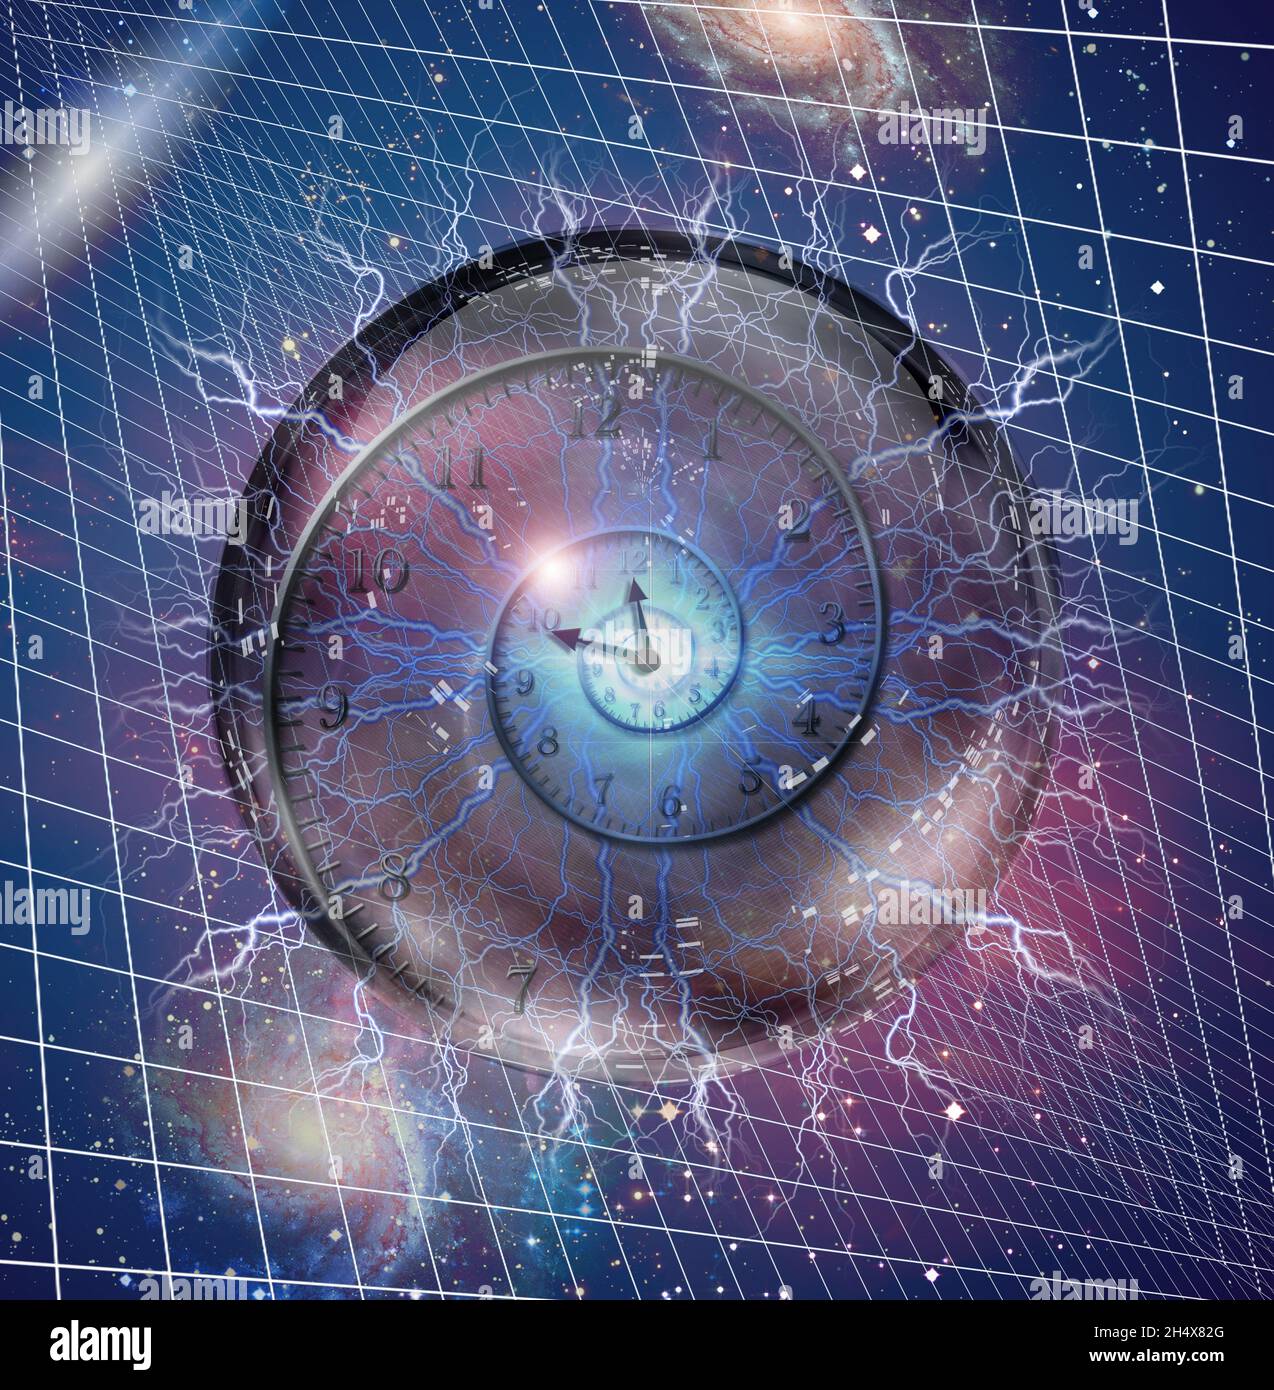 Spiral clock on abstract grid. 3D rendering. Stock Photo